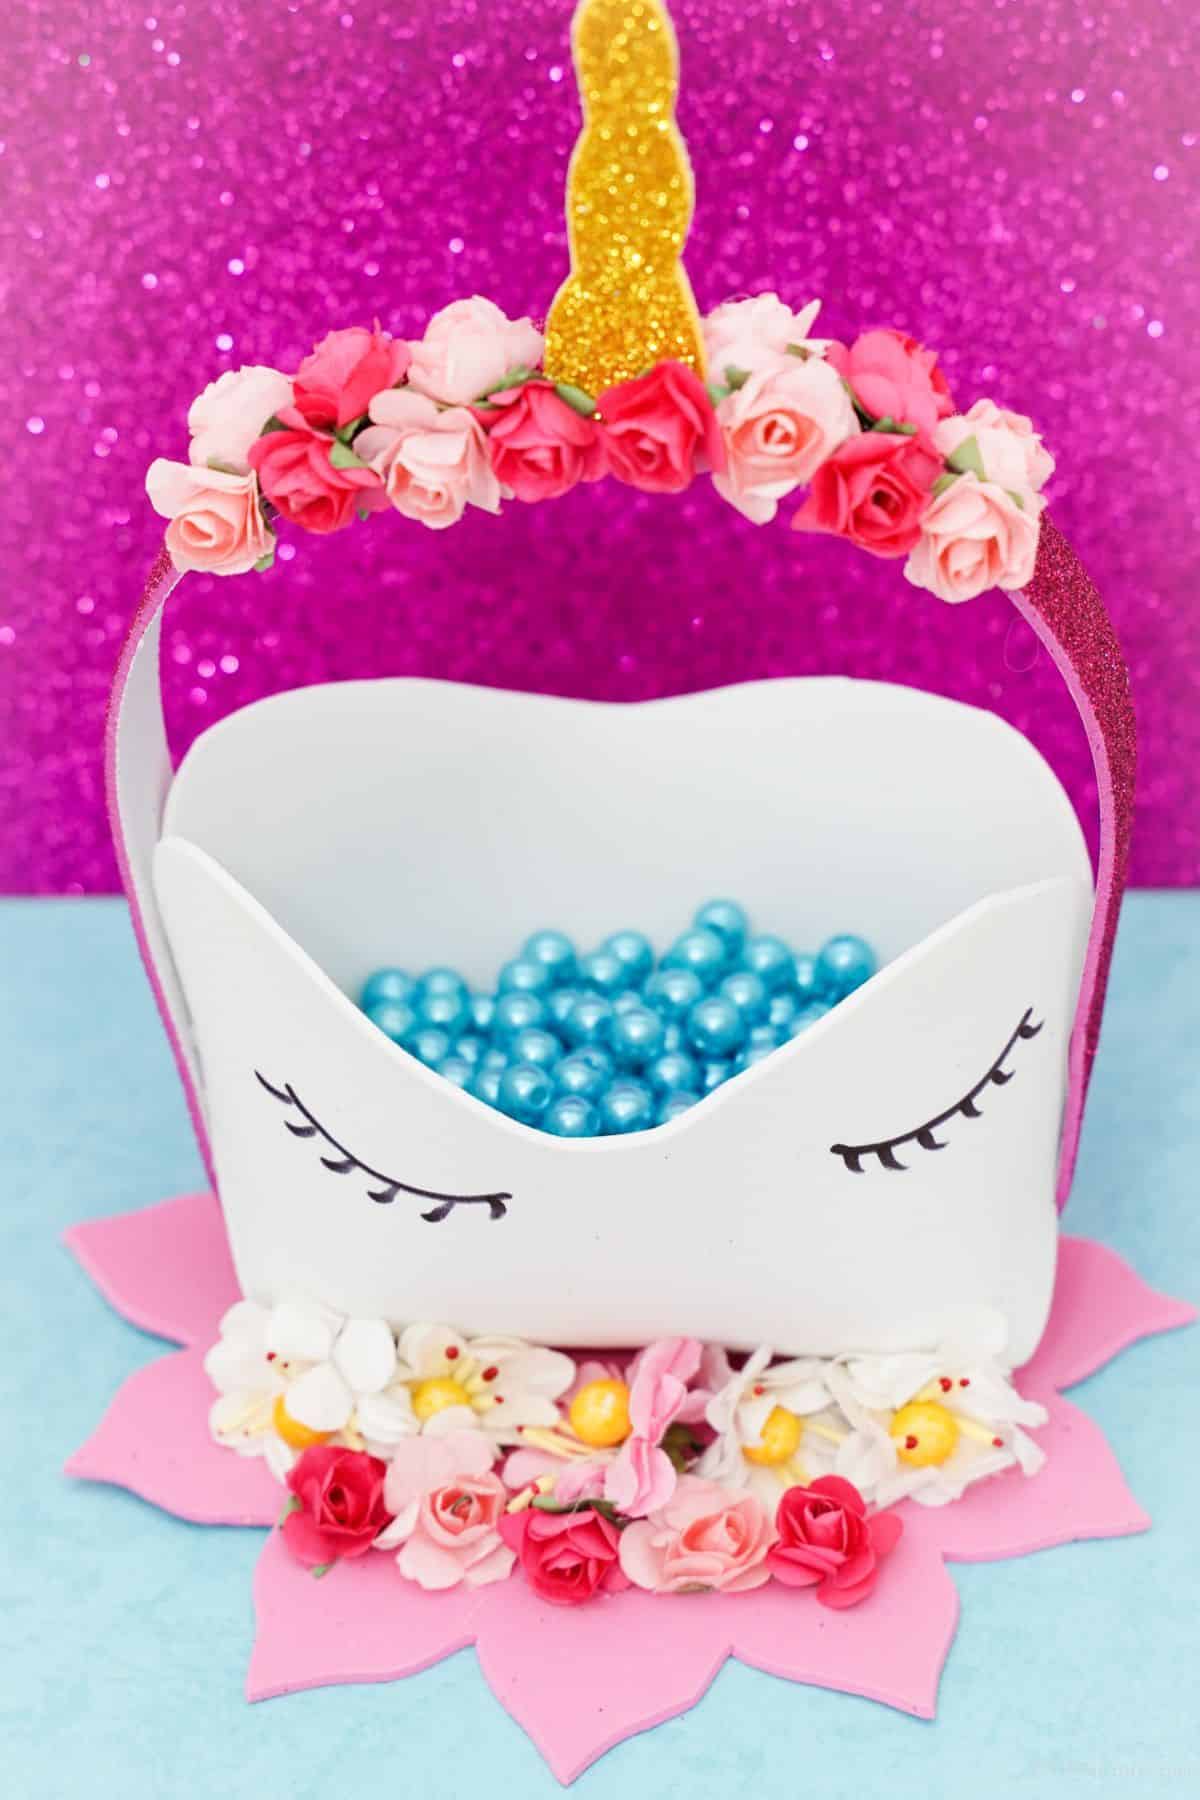 white and pink unicorn basket on a blue table with pink glitter background